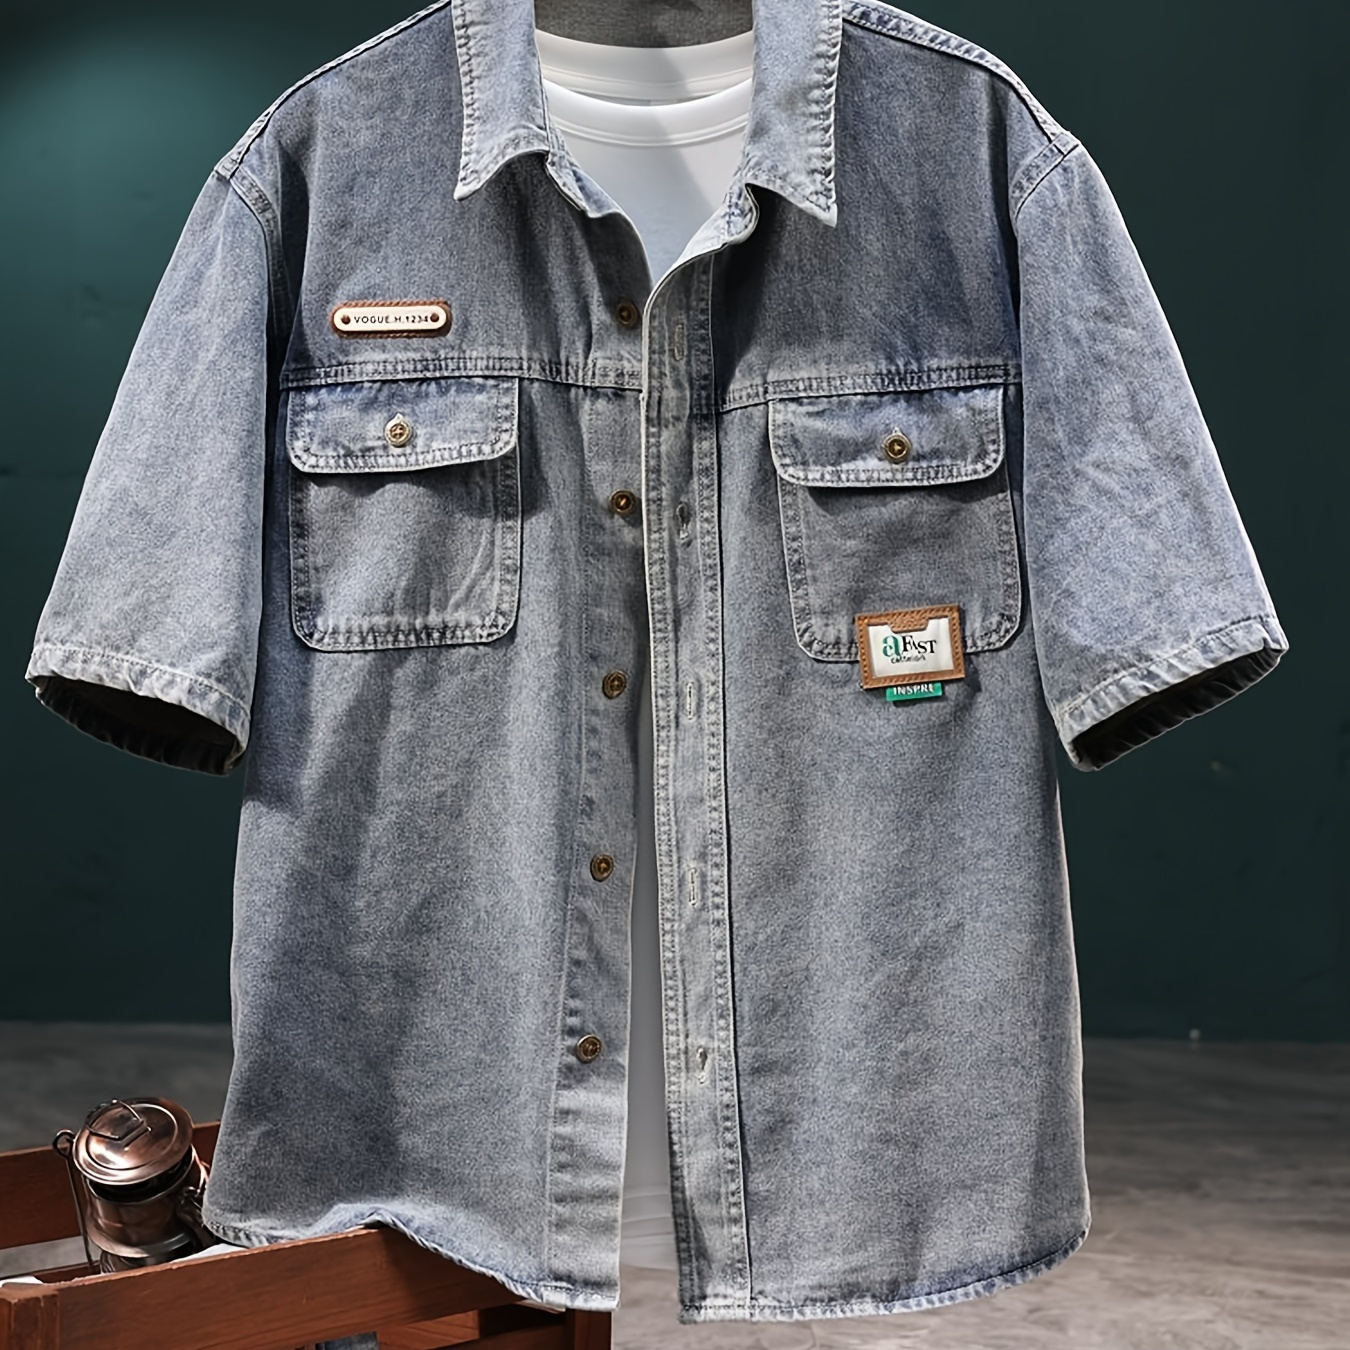 

Men's Solid Denim Shirt With Chest Pockets, Vintage Style Lapel Button Up Cotton Blend Short Sleeve Shirt For Summer Outdoor Activities